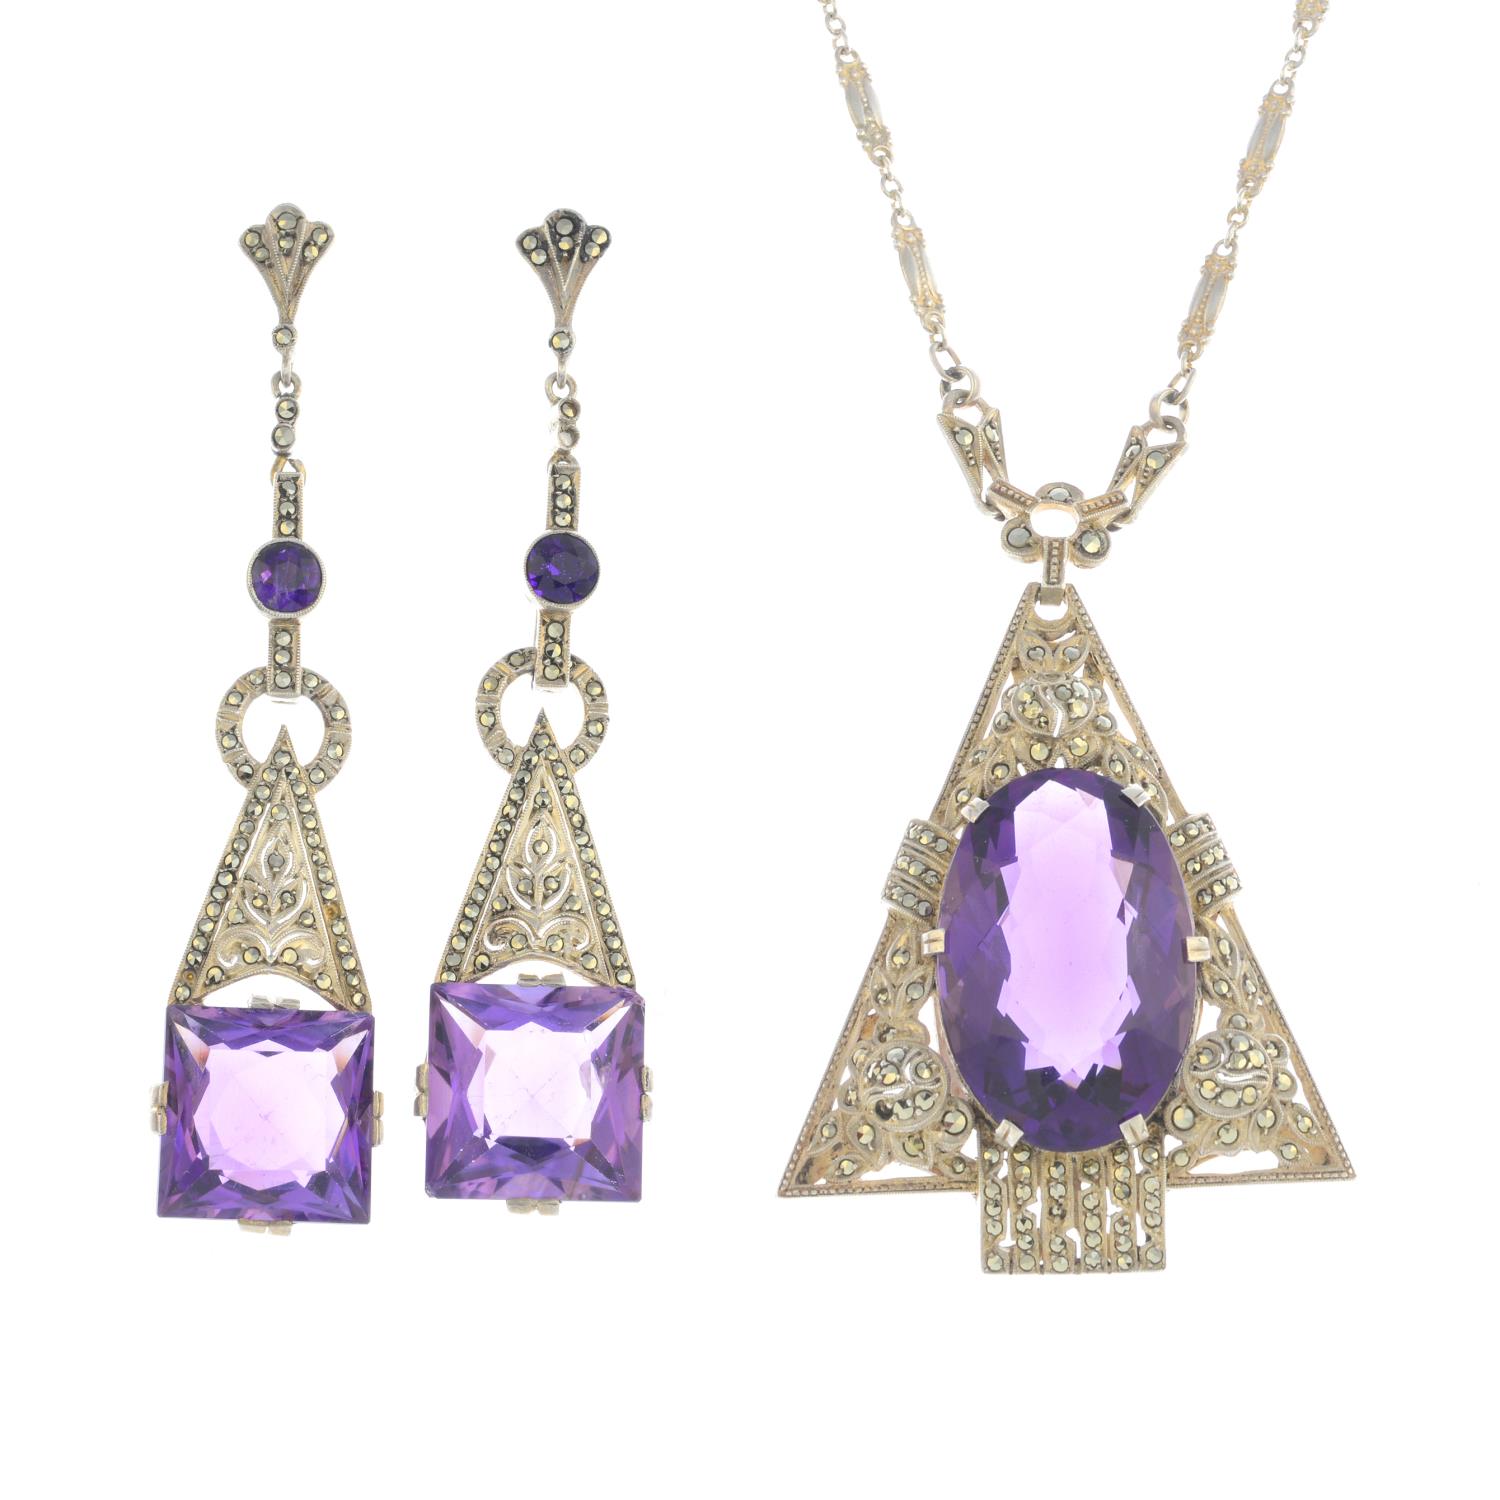 THEODOR FAHRNER - an early 20th century silver amethyst and marcasite pendant and earrings.